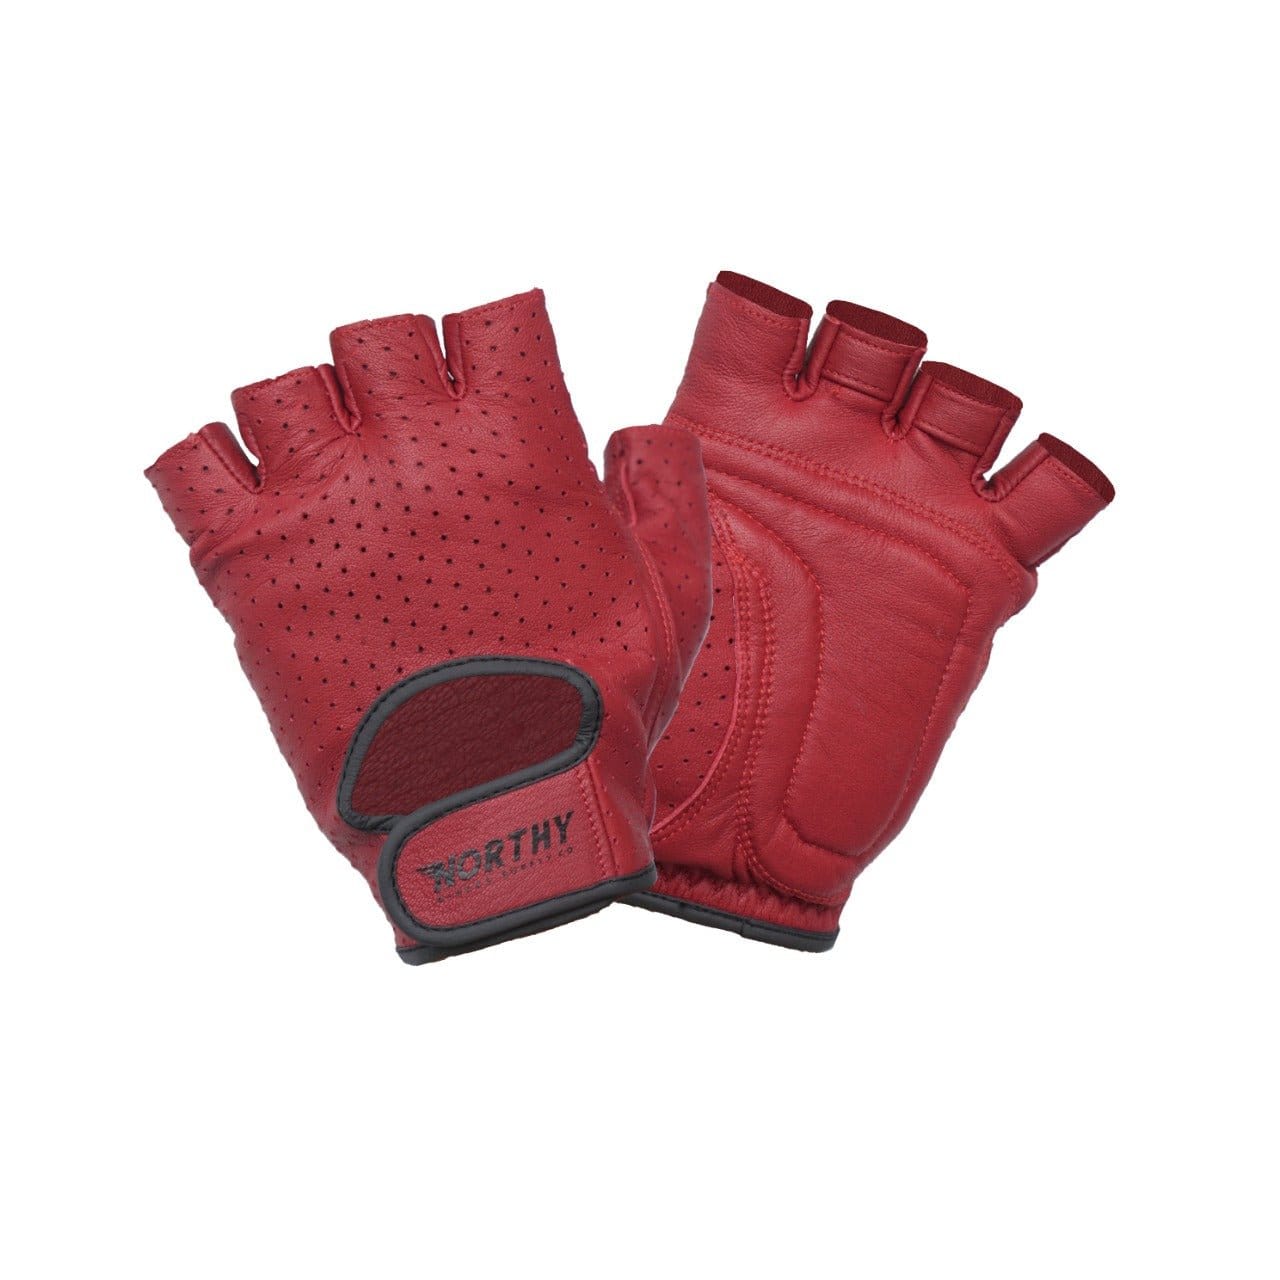 Nord Leather Gloves - Northy